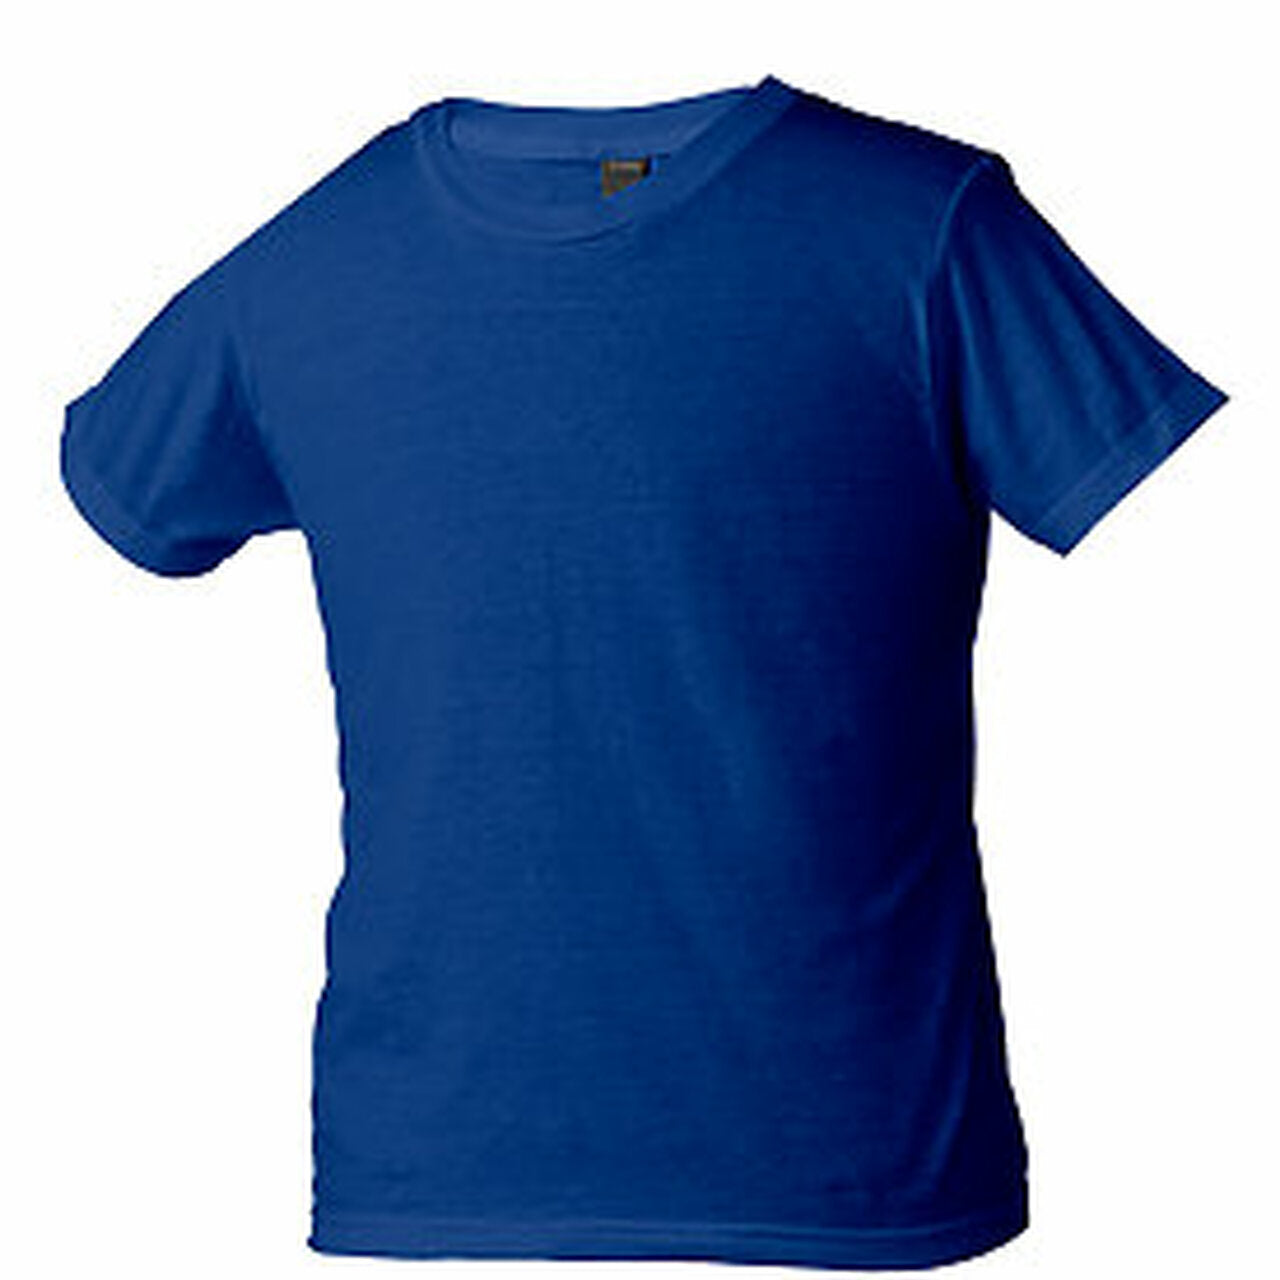 Tultex 235 - Youth Fine Jersey Tee Heather Colors